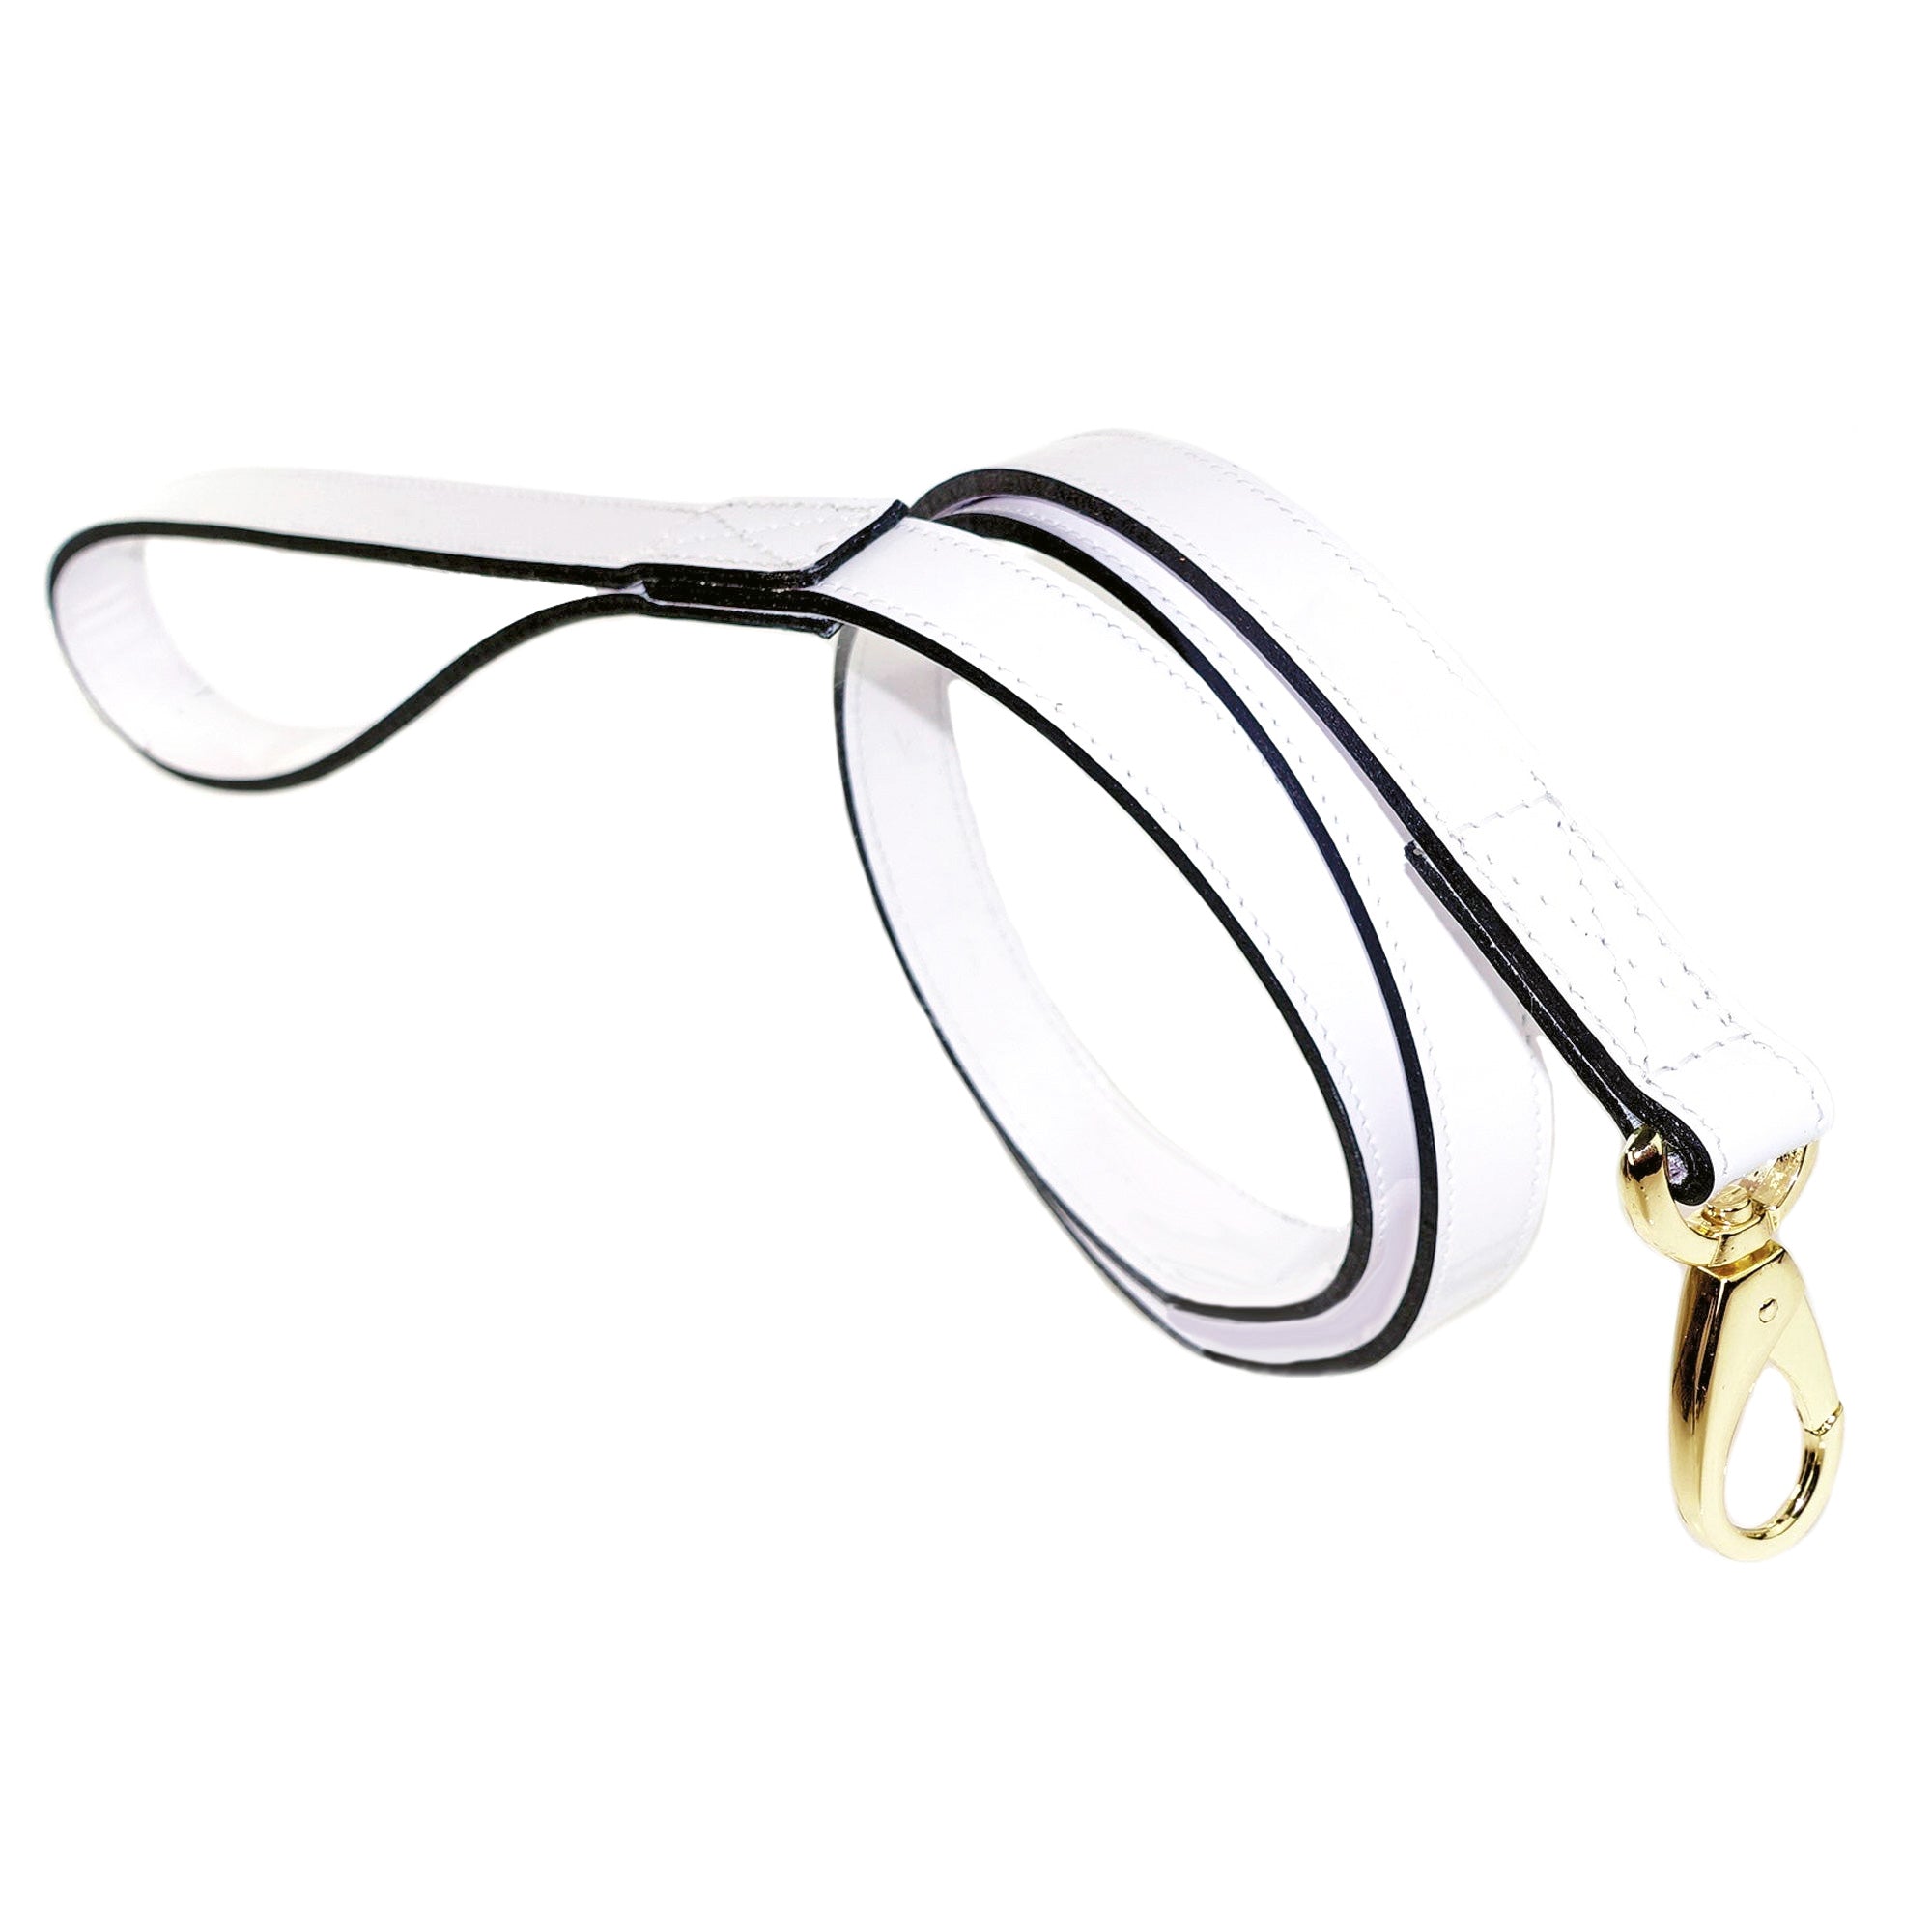 Italian White Patent Leather Dog Leash in Gold